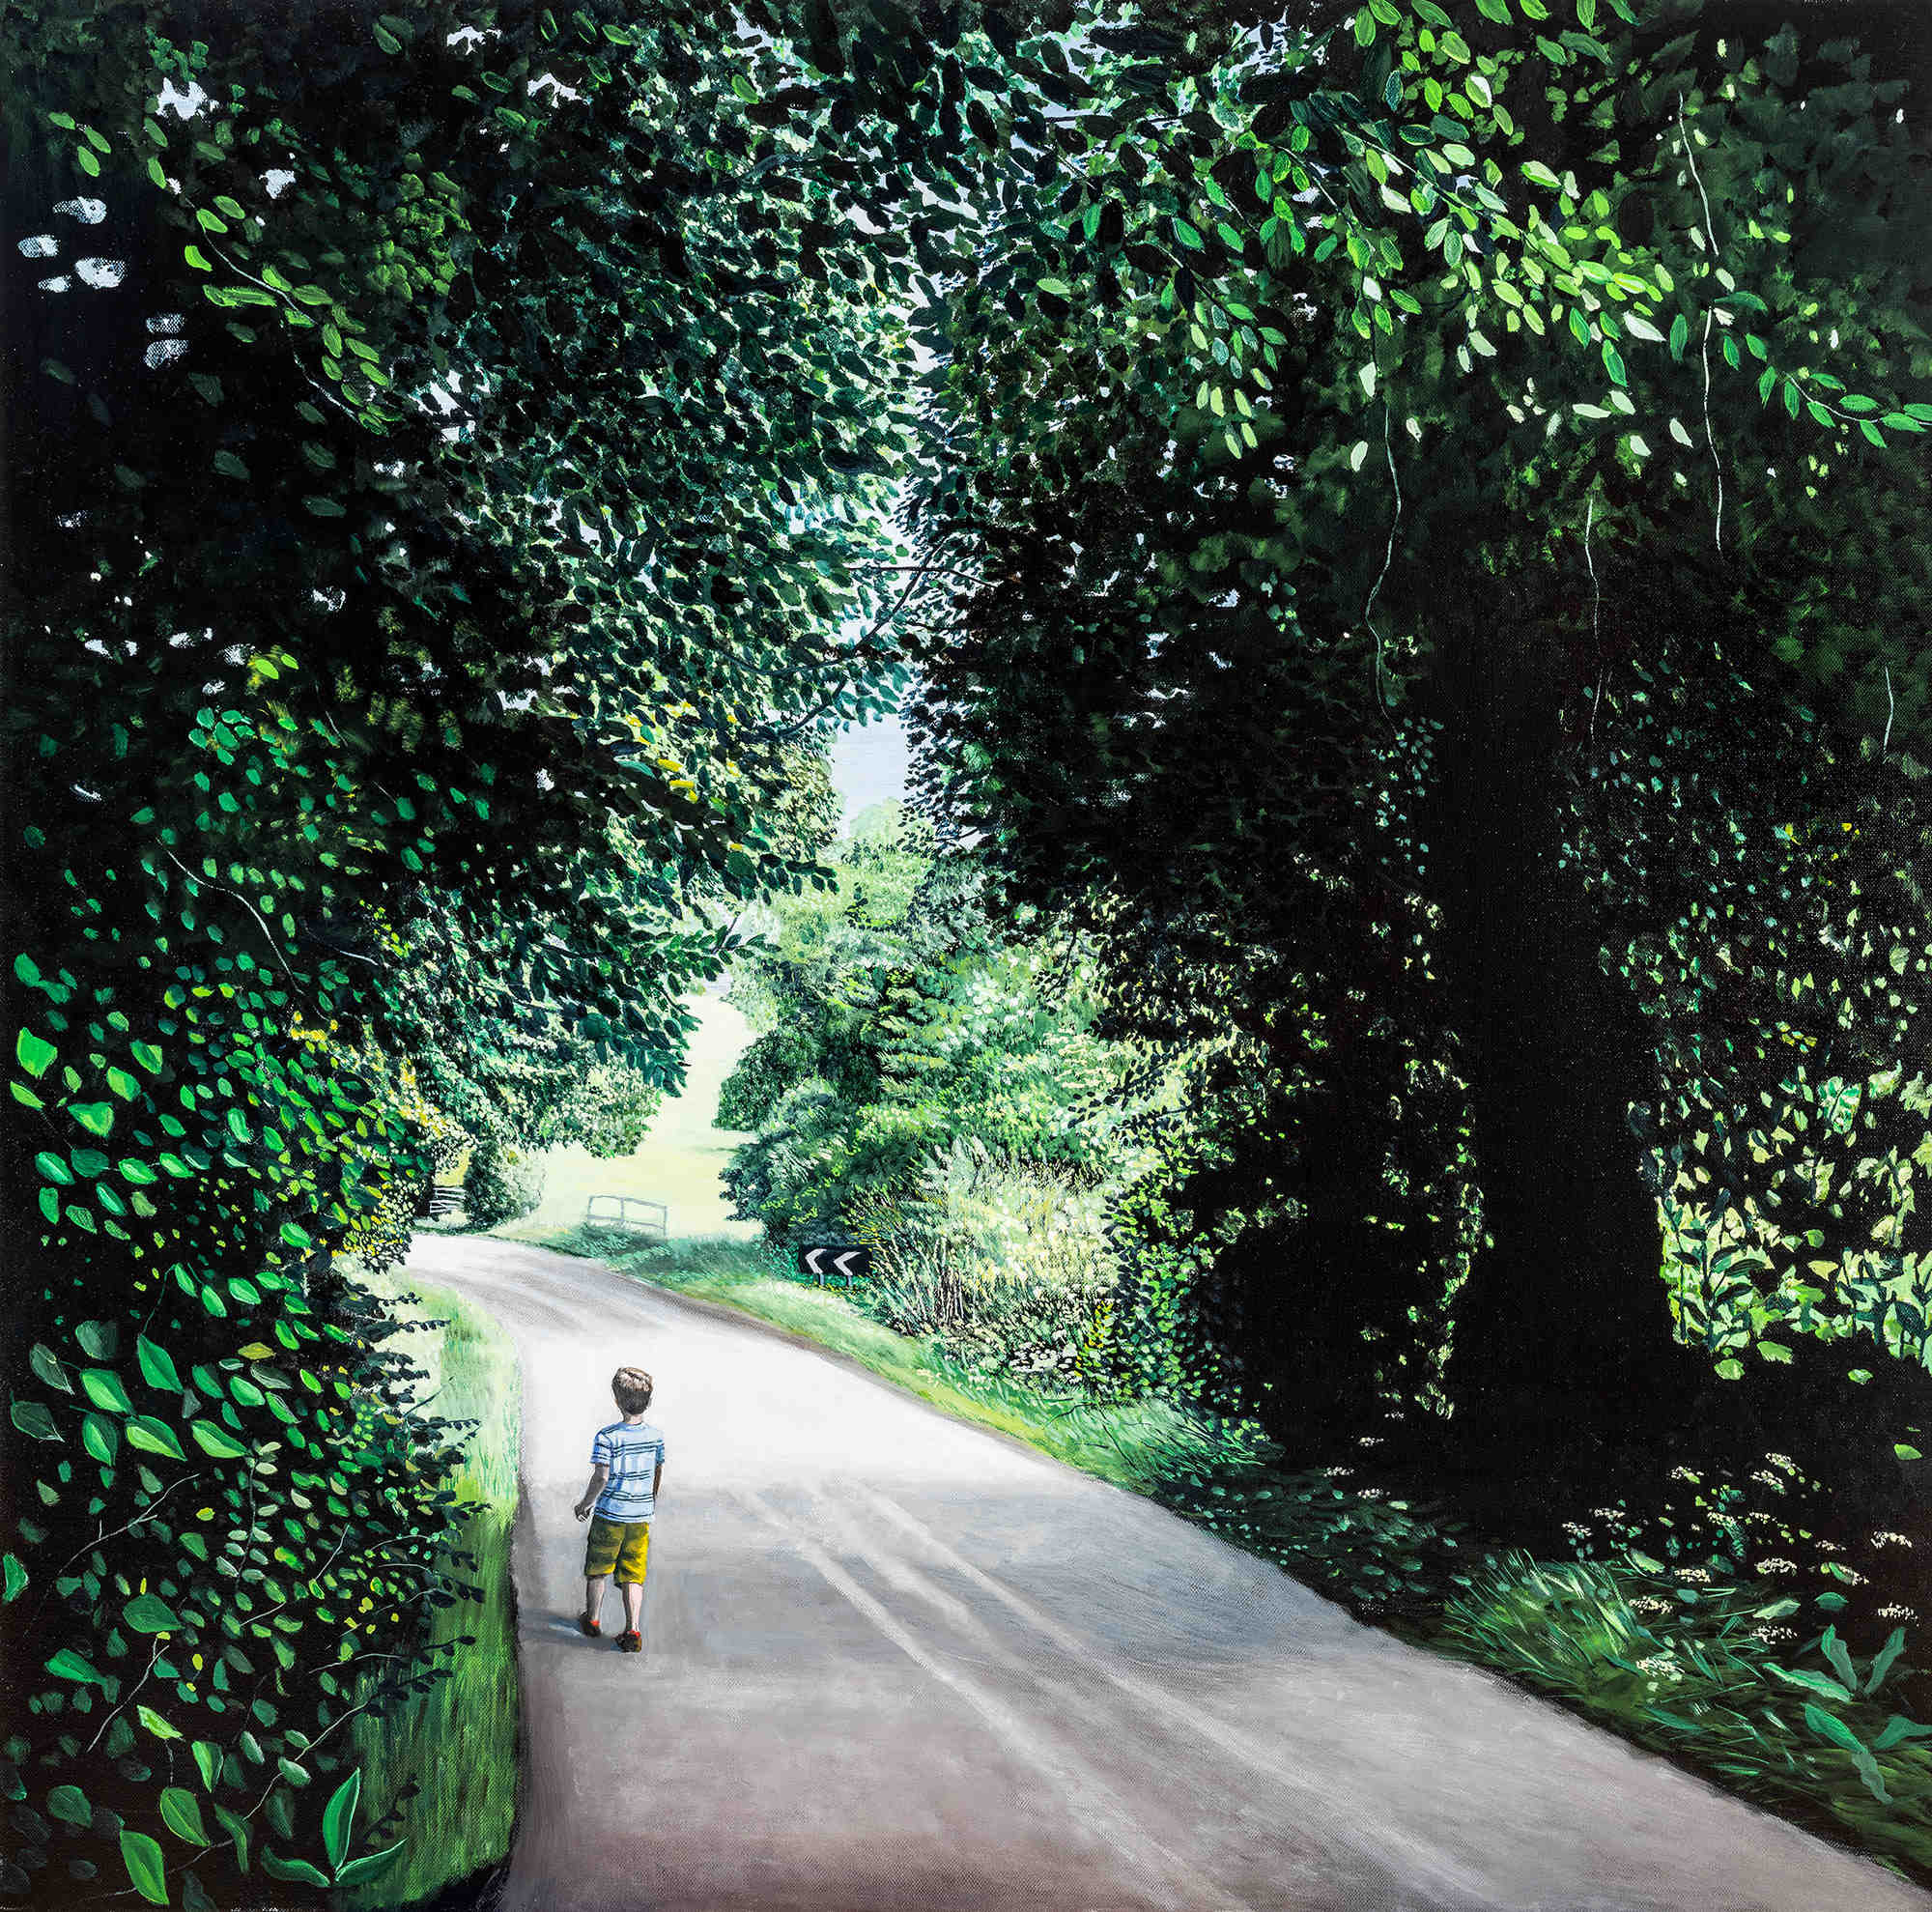 Anne WALLACE 'Journey' 2013 | oil on canvas | Private collection, Brisbane